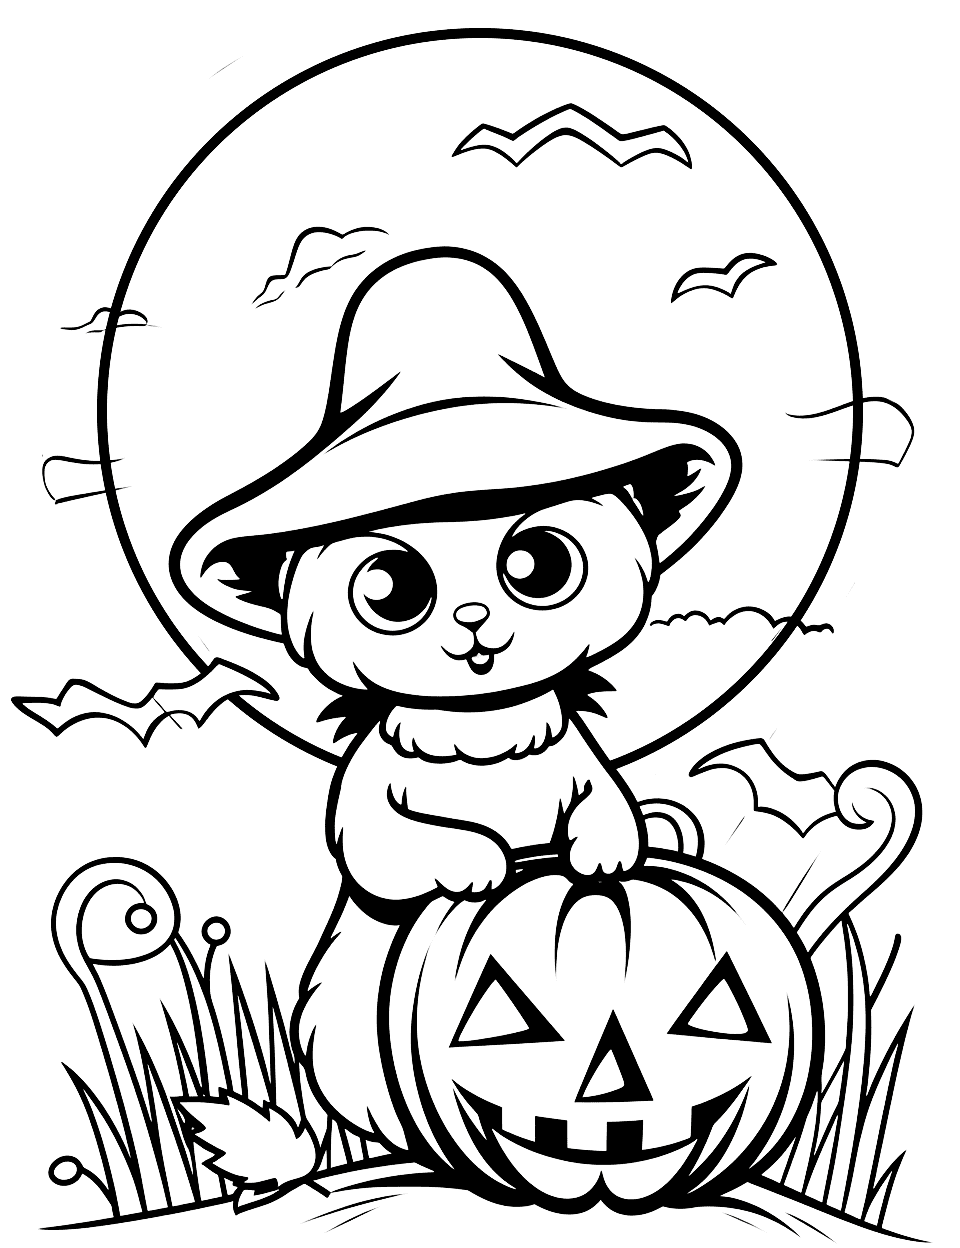 Black Cat and the Full Moon Halloween Coloring Page - A striking scene of a black cat sitting on a pumpkin, with a full moon in the background.